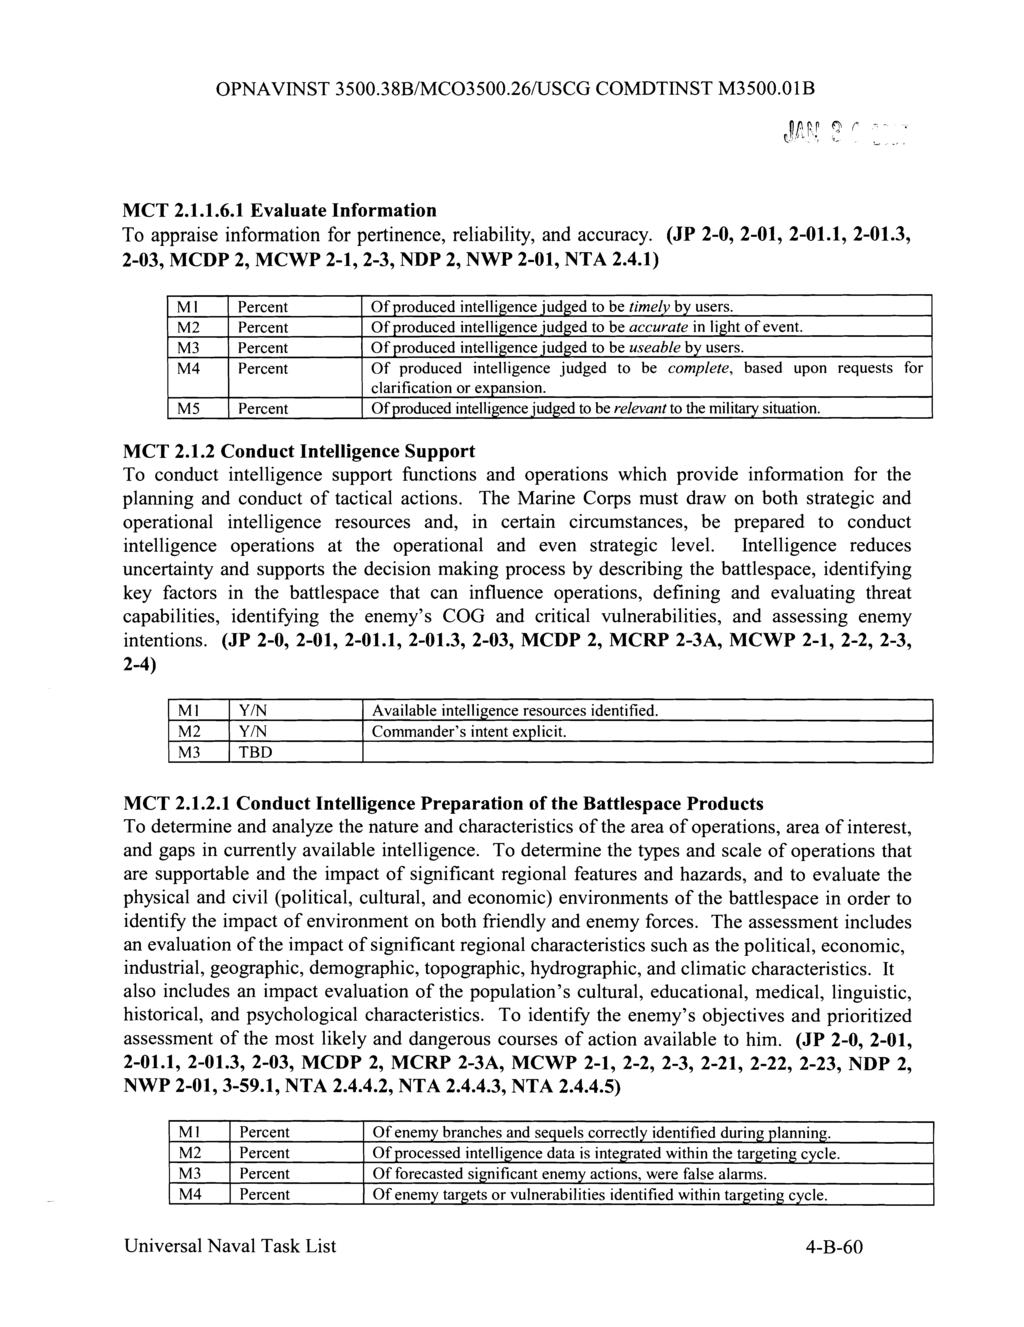 OPNAVINST 3500.38B/MC03500.26/USCG COMDTINST 500.0 1 B JCFB - a. MCT 2.1.1.6.1 Evaluate Information To appraise information for pertinence, reliability, and accuracy. (JP 2-0, 2-01, 2-01.